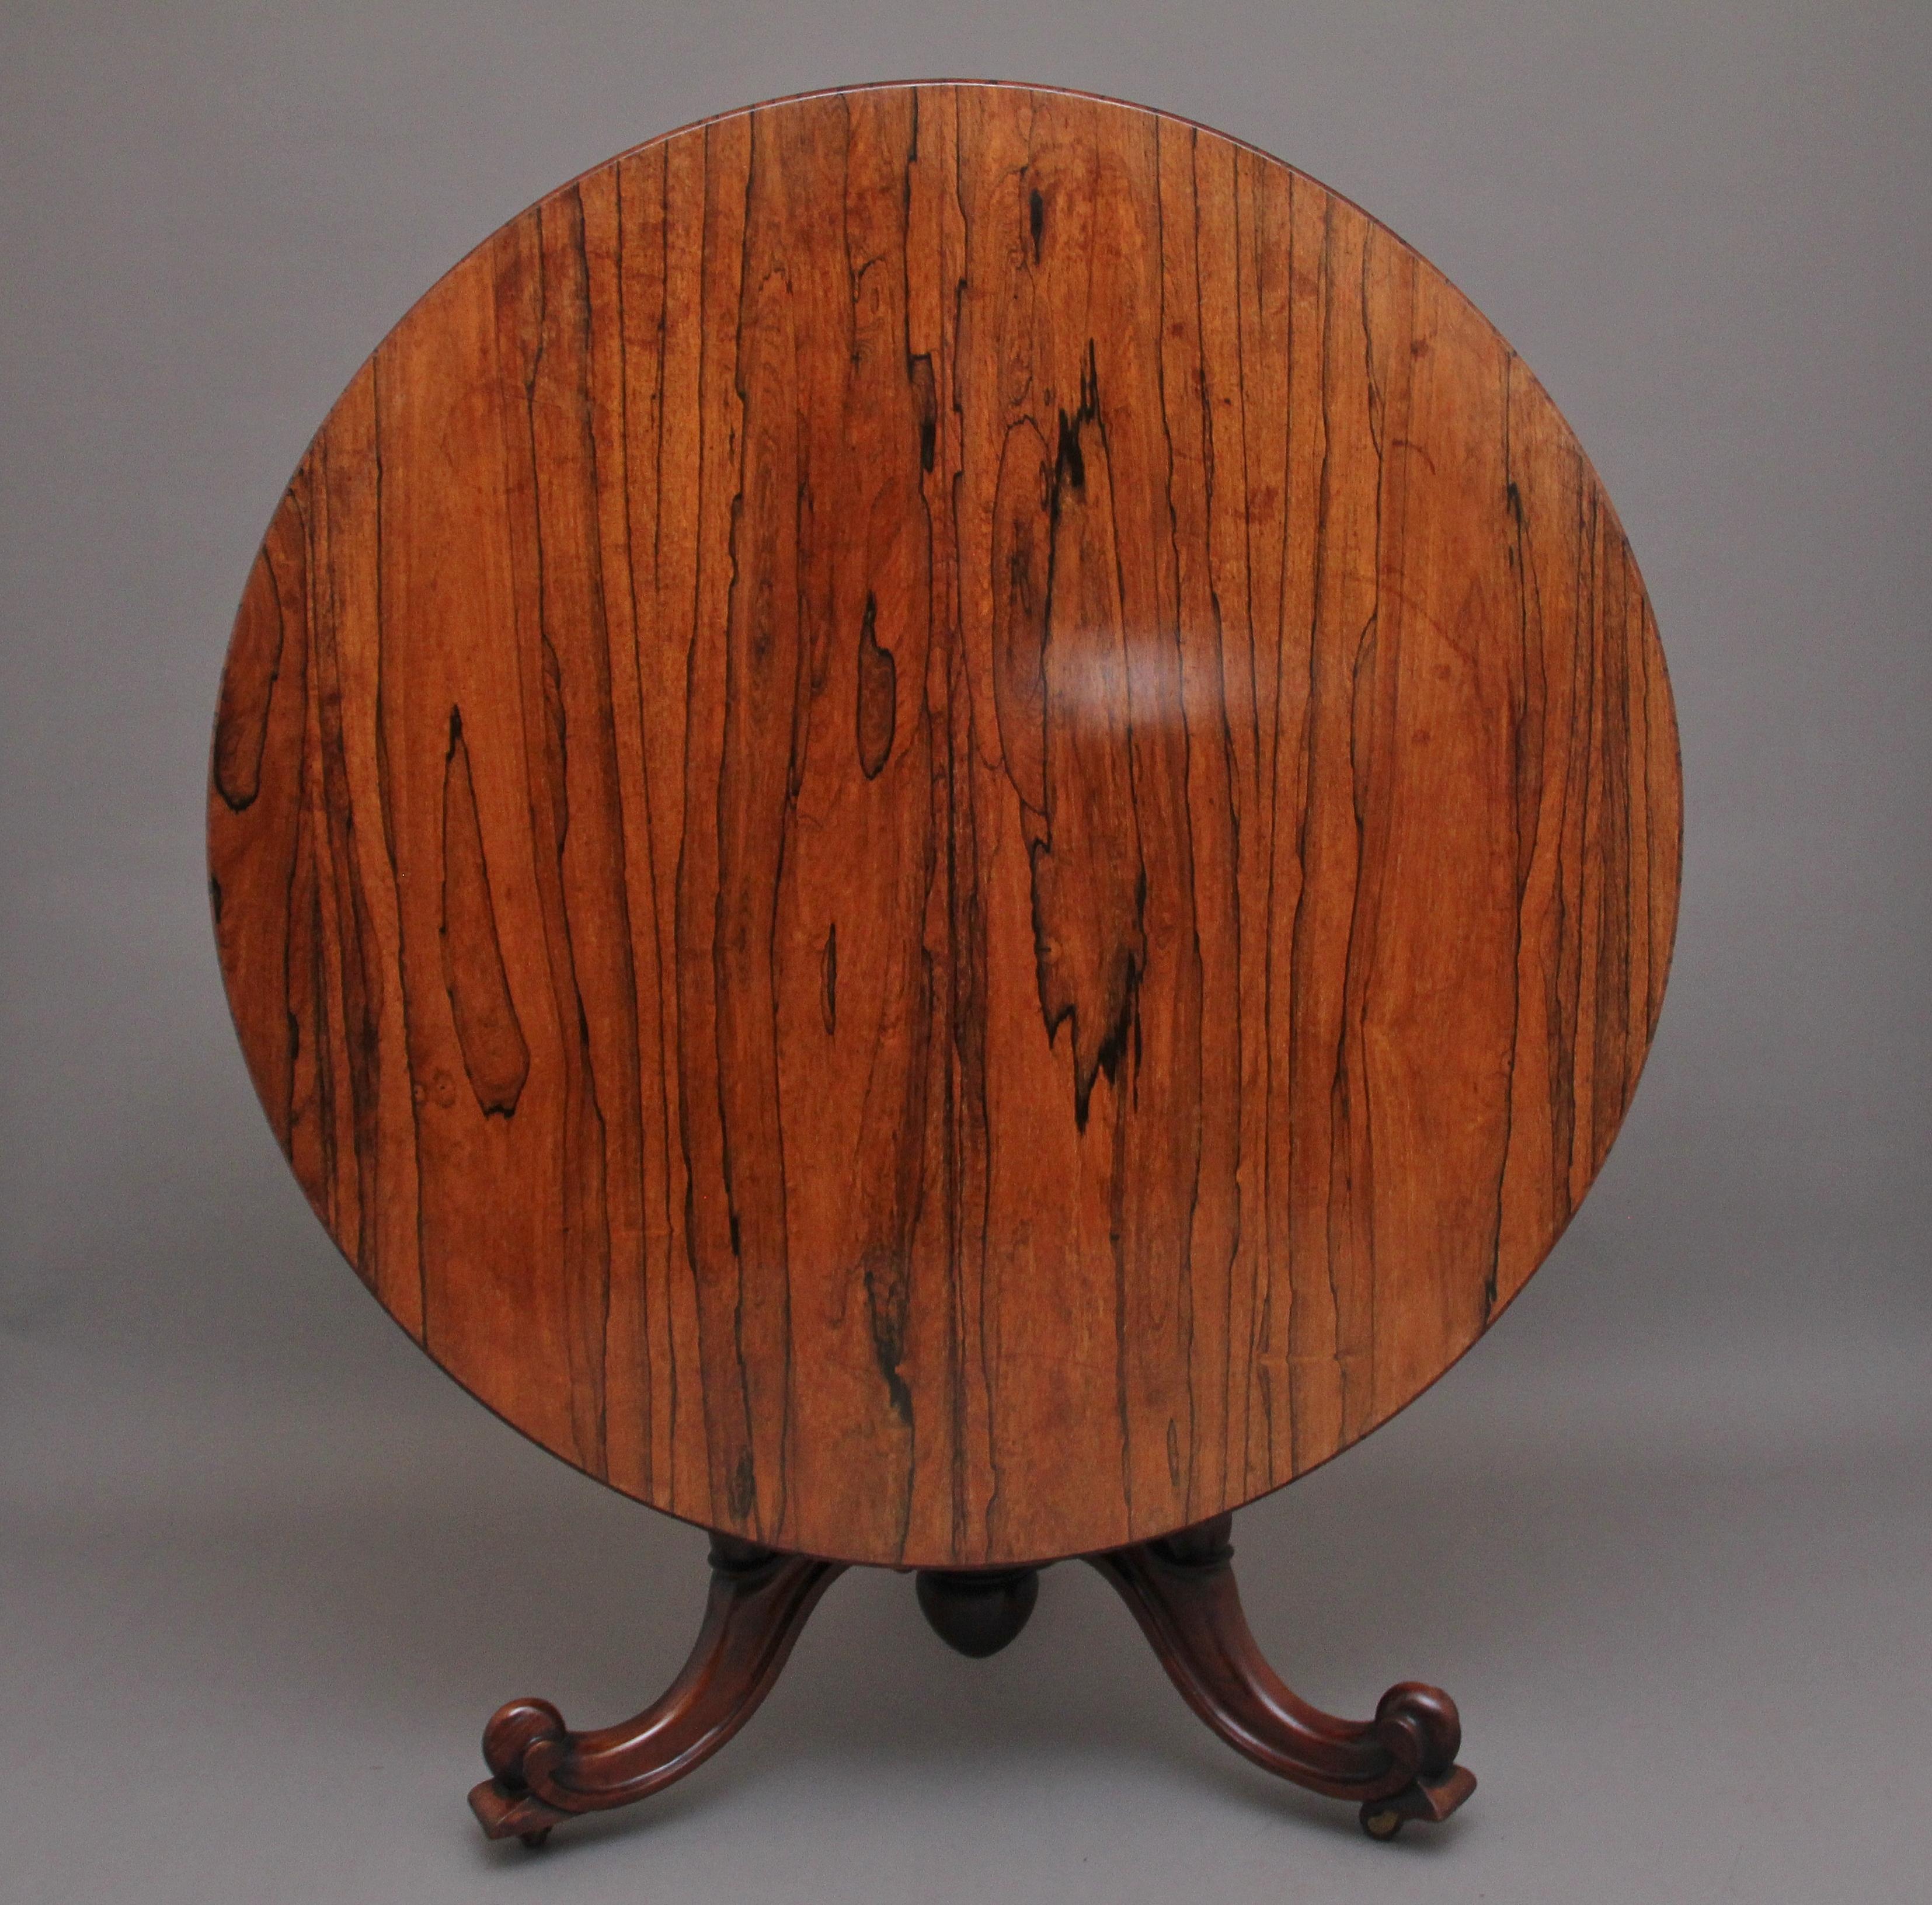 19th century rosewood tilt top breakfast / centre table, with a beautifully figured top with frieze below, supported on a turned tulip shaped column with three carved cabriole legs terminating on carved scroll feet. In excellent condition and having